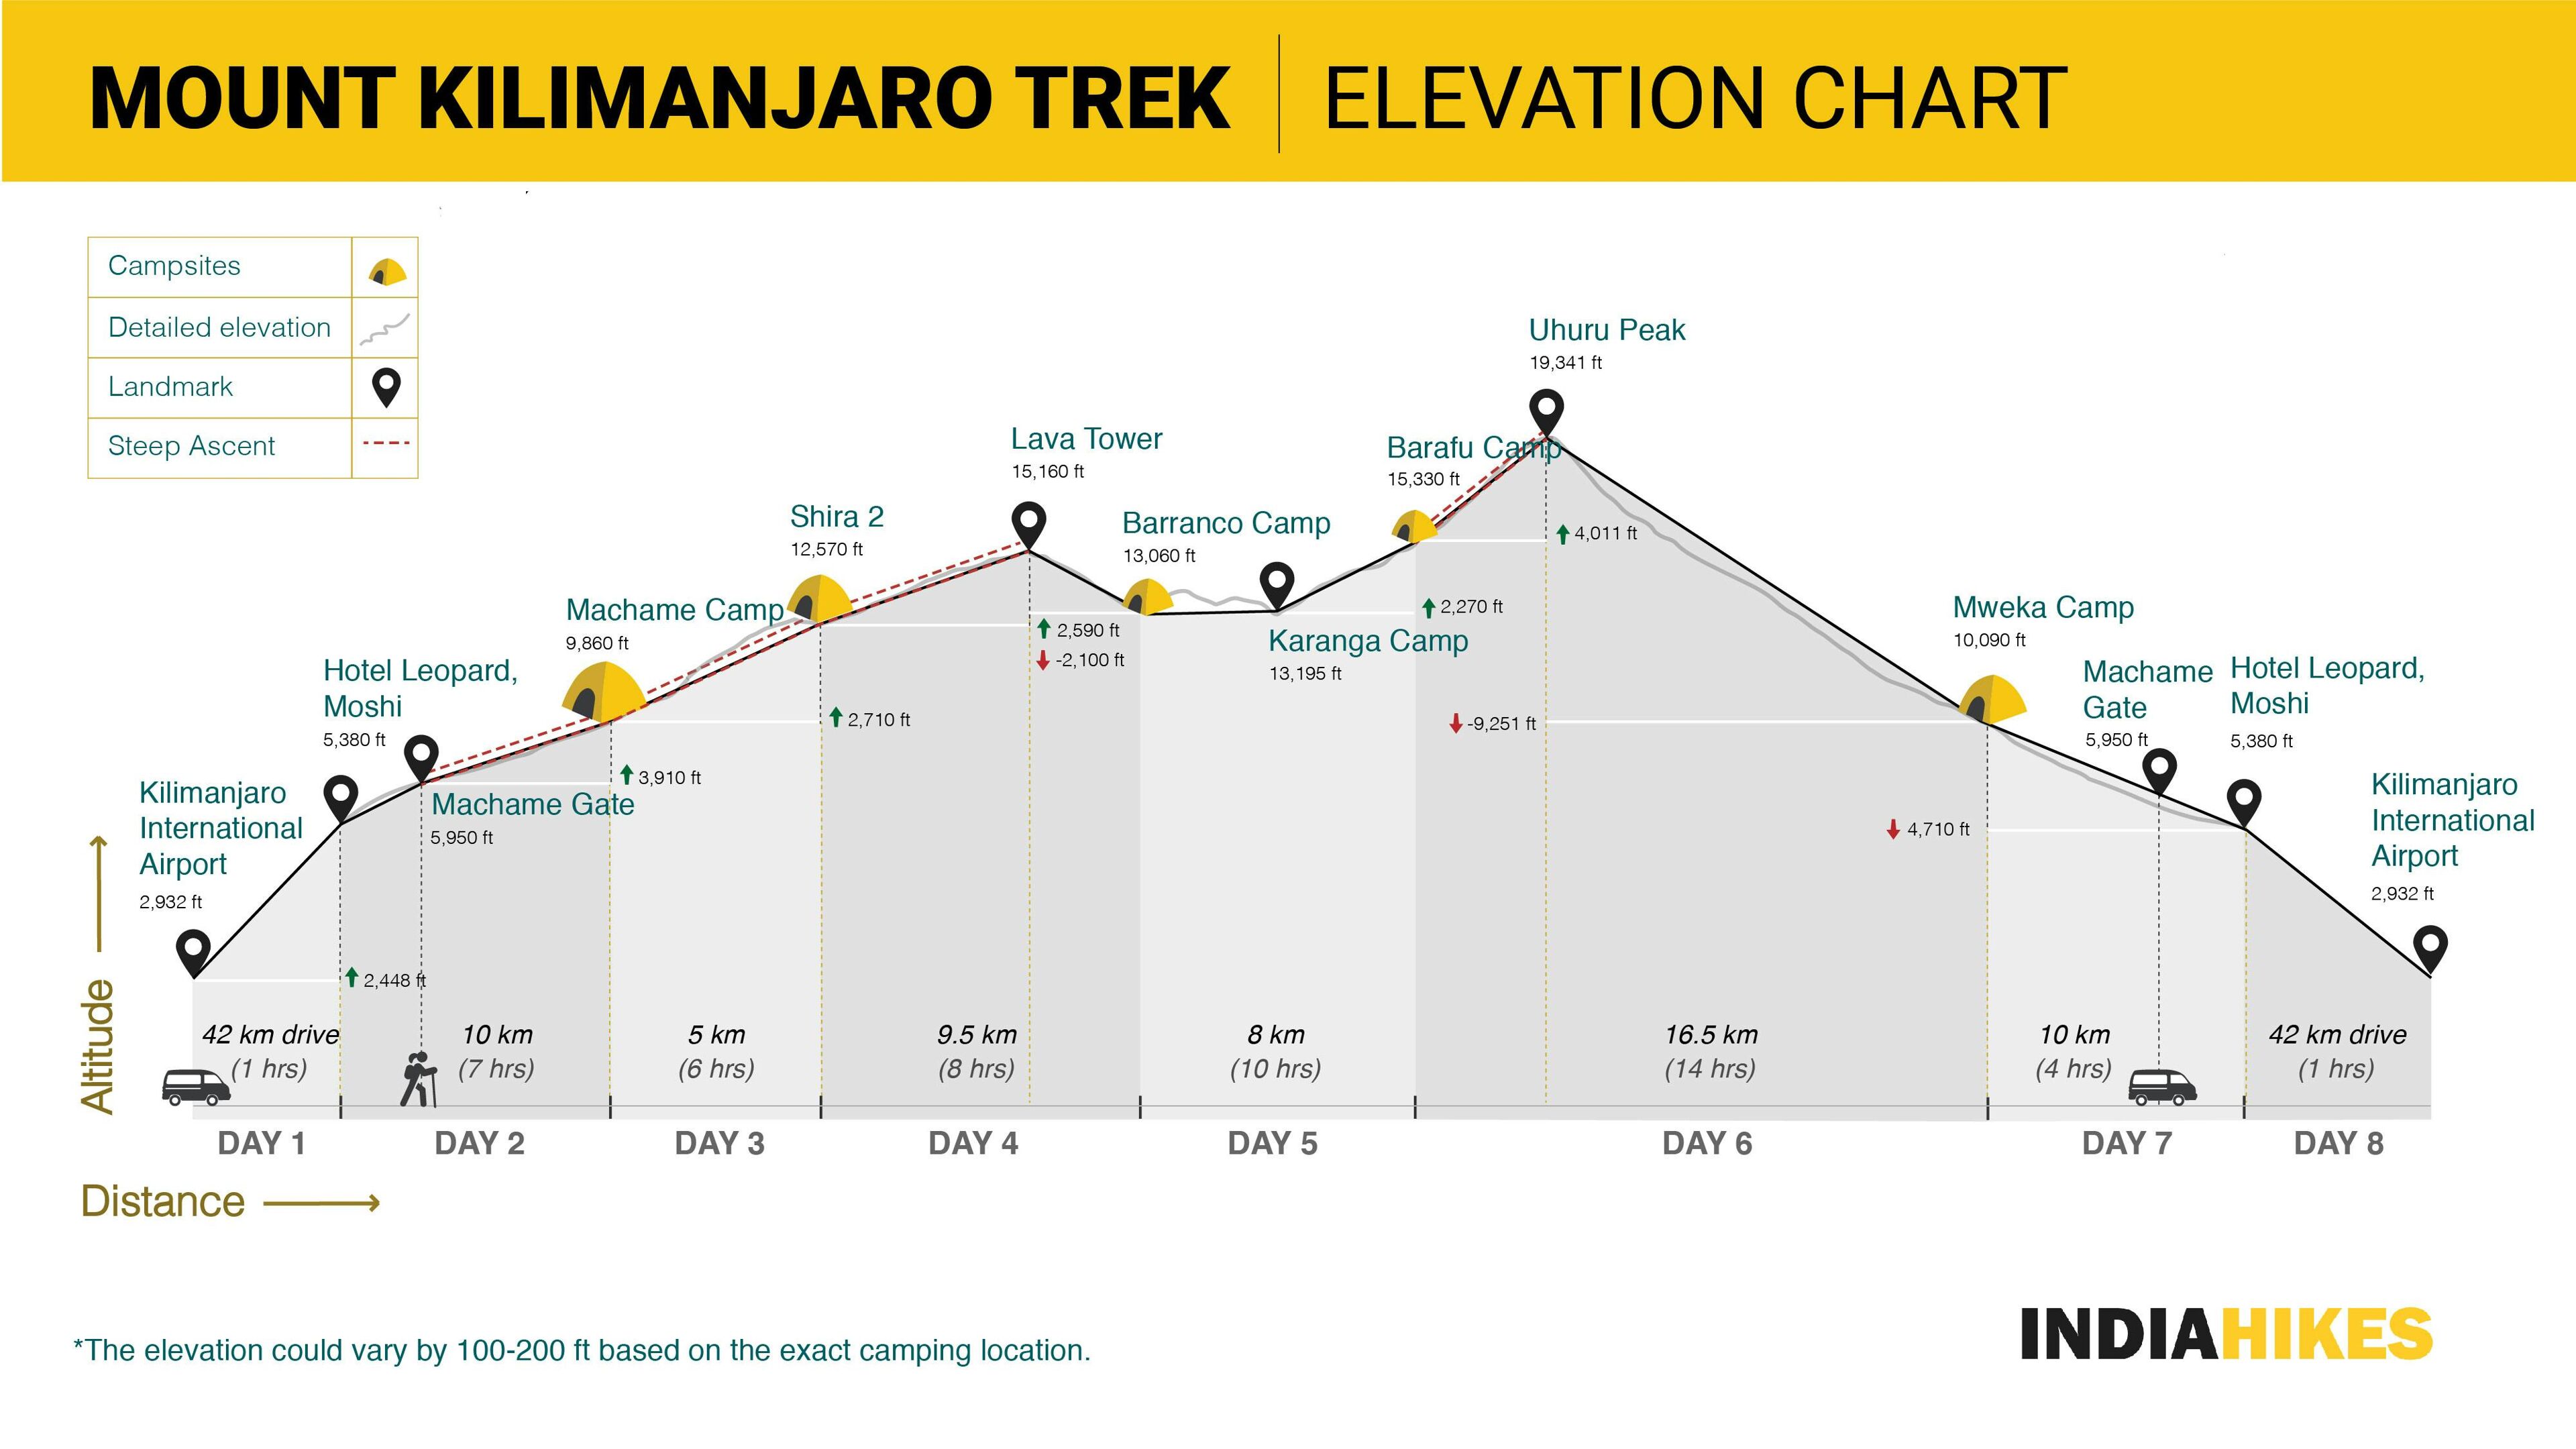 dc0c3778 4f5d 4be2 9556 e7a7bd5755fc indiahikes mount kilimanjaro elevation chart 06